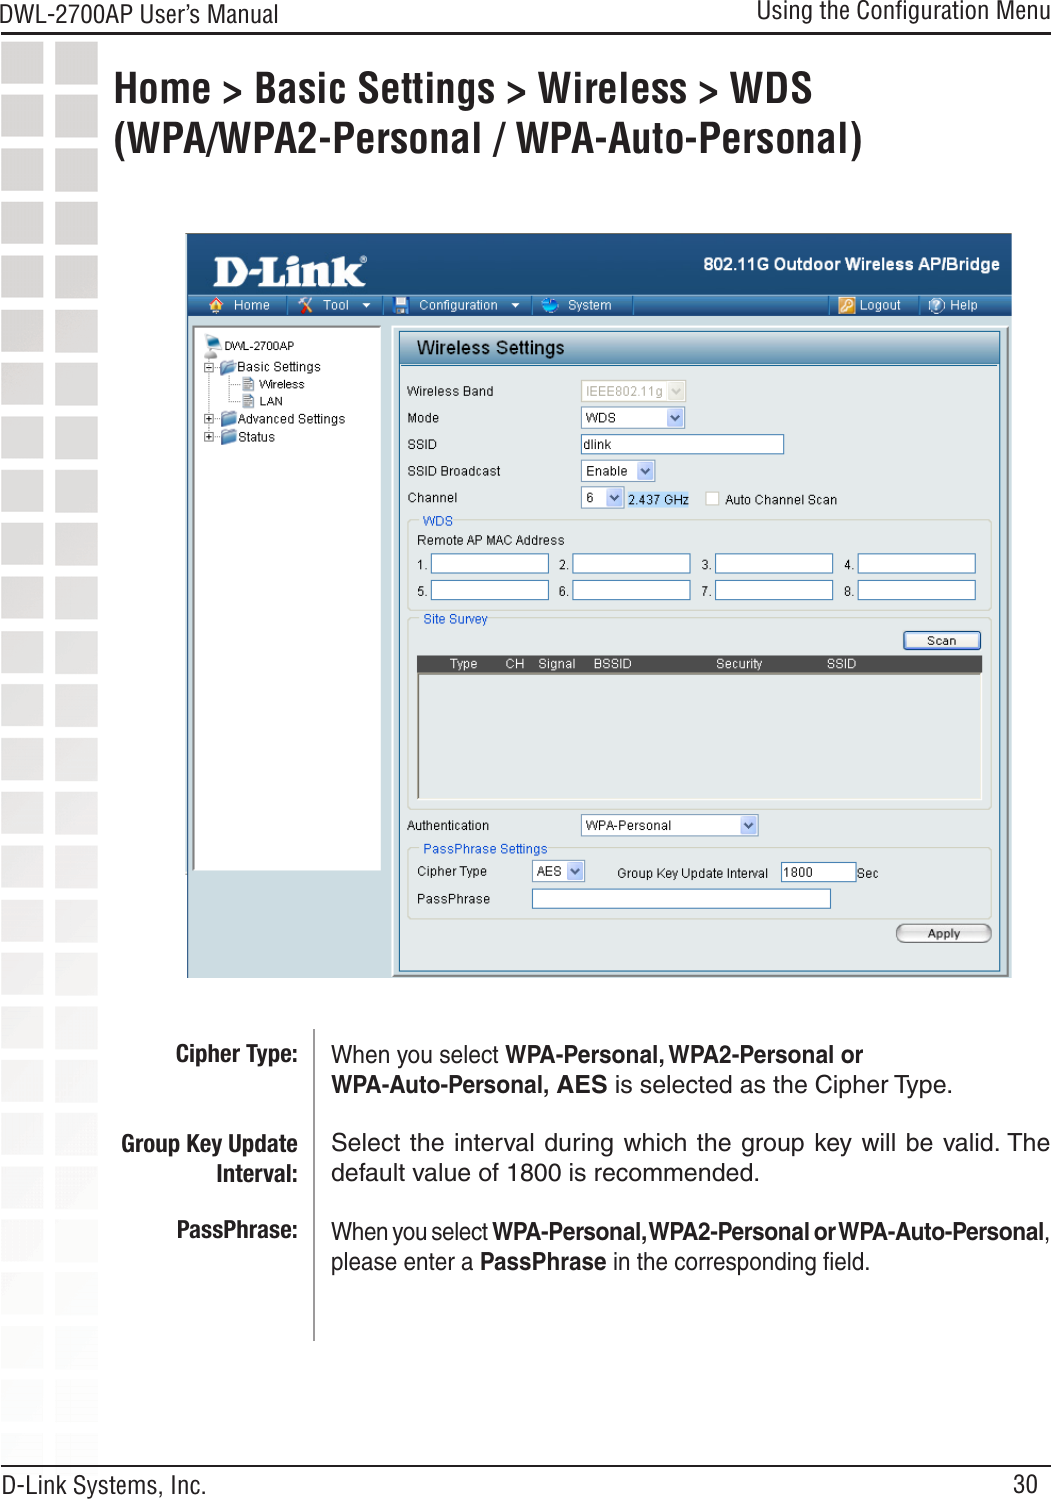 30DWL-2700AP User’s Manual D-Link Systems, Inc.Using the Conﬁguration MenuHome &gt; Basic Settings &gt; Wireless &gt; WDS  (WPA/WPA2-Personal / WPA-Auto-Personal)When you select WPA-Personal, WPA2-Personal or  WPA-Auto-Personal, AES is selected as the Cipher Type.Select the interval during which the group key will be valid. The default value of 1800 is recommended.When you select WPA-Personal, WPA2-Personal or WPA-Auto-Personal, please enter a PassPhrase in the corresponding ﬁeld.Cipher Type:Group Key Update Interval:PassPhrase: